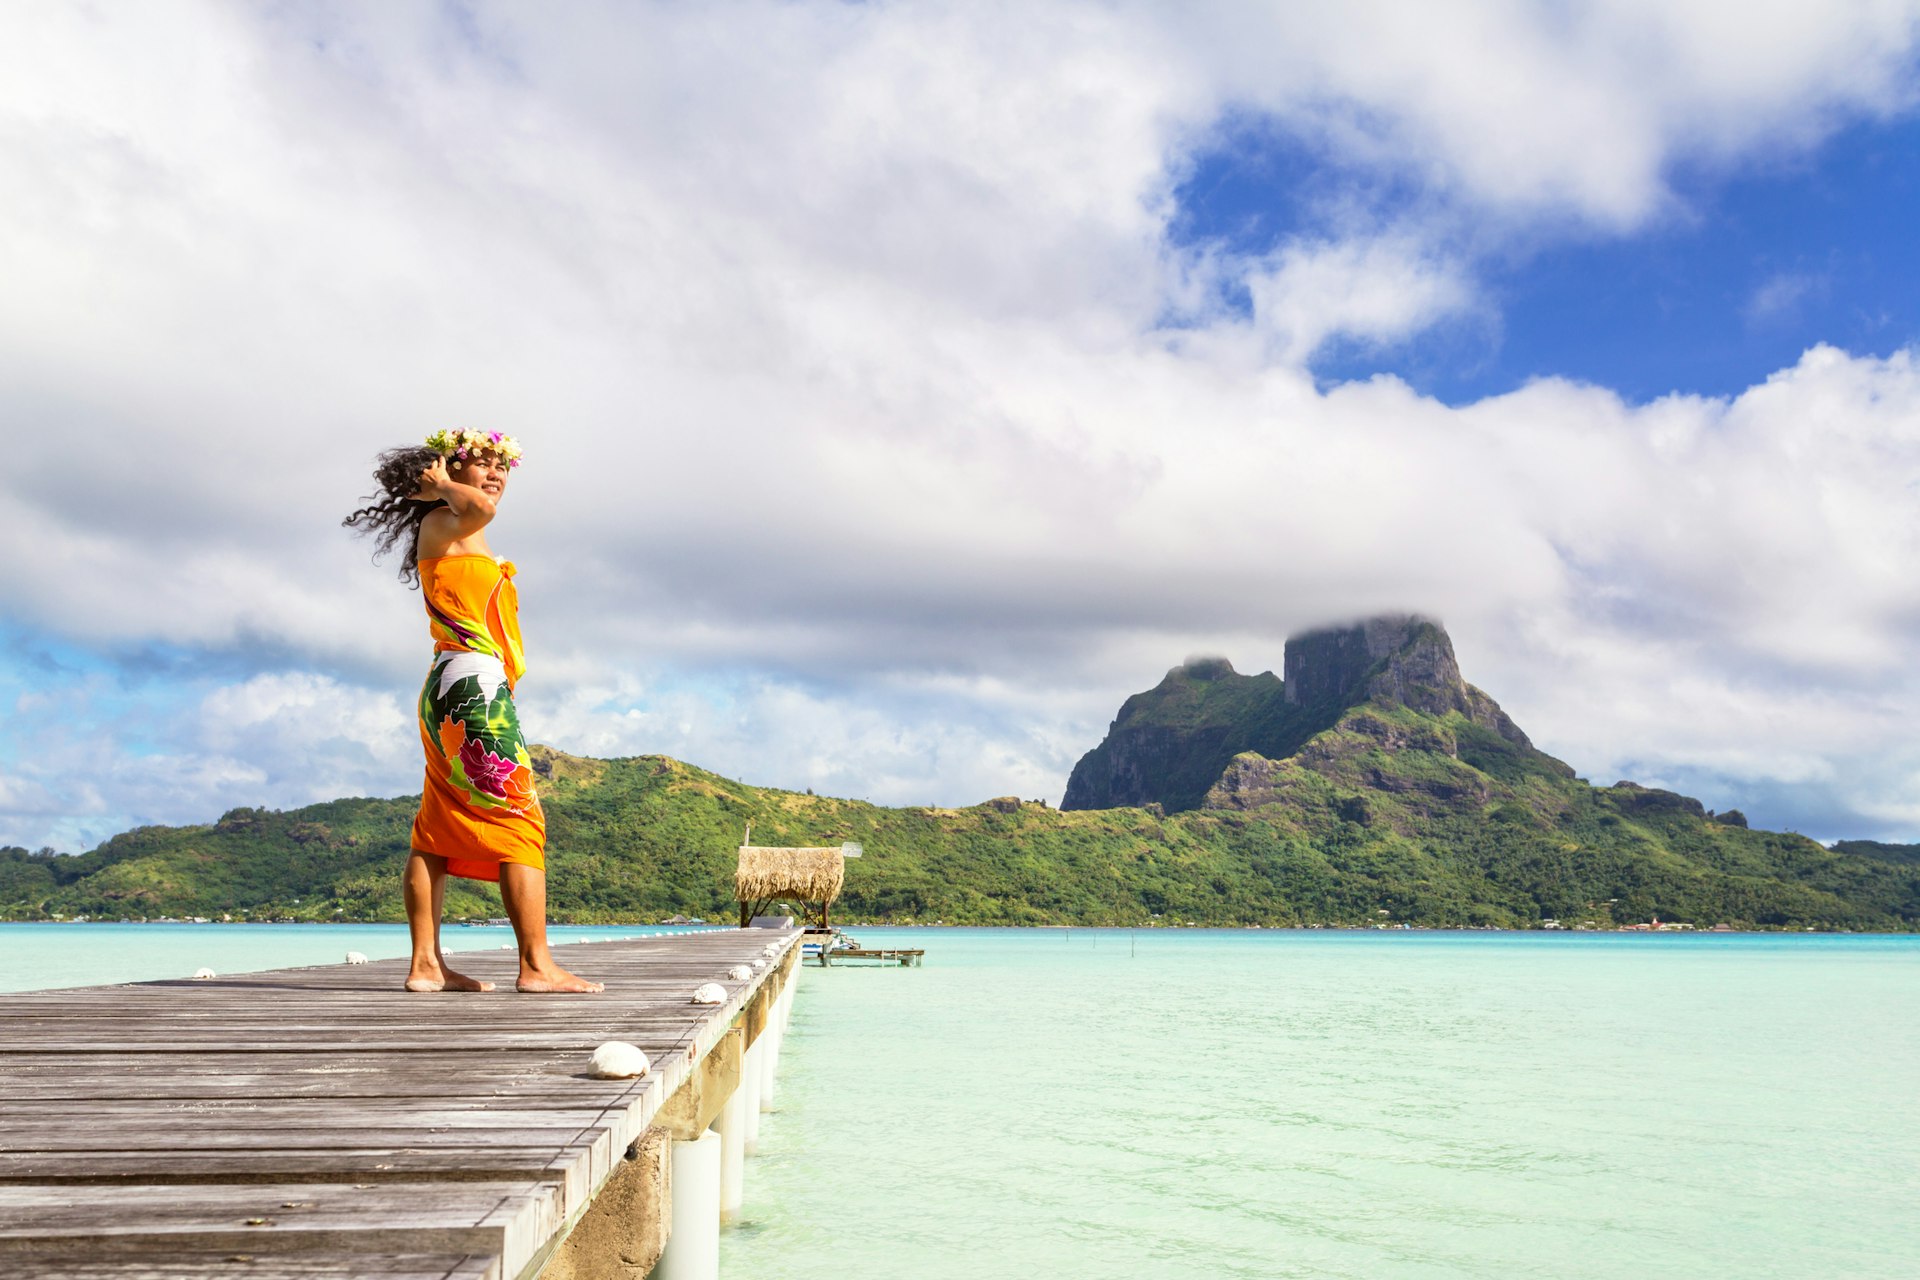 A local woman standing on a jetty wearing a colorful sarong, Bora Bora lagoon